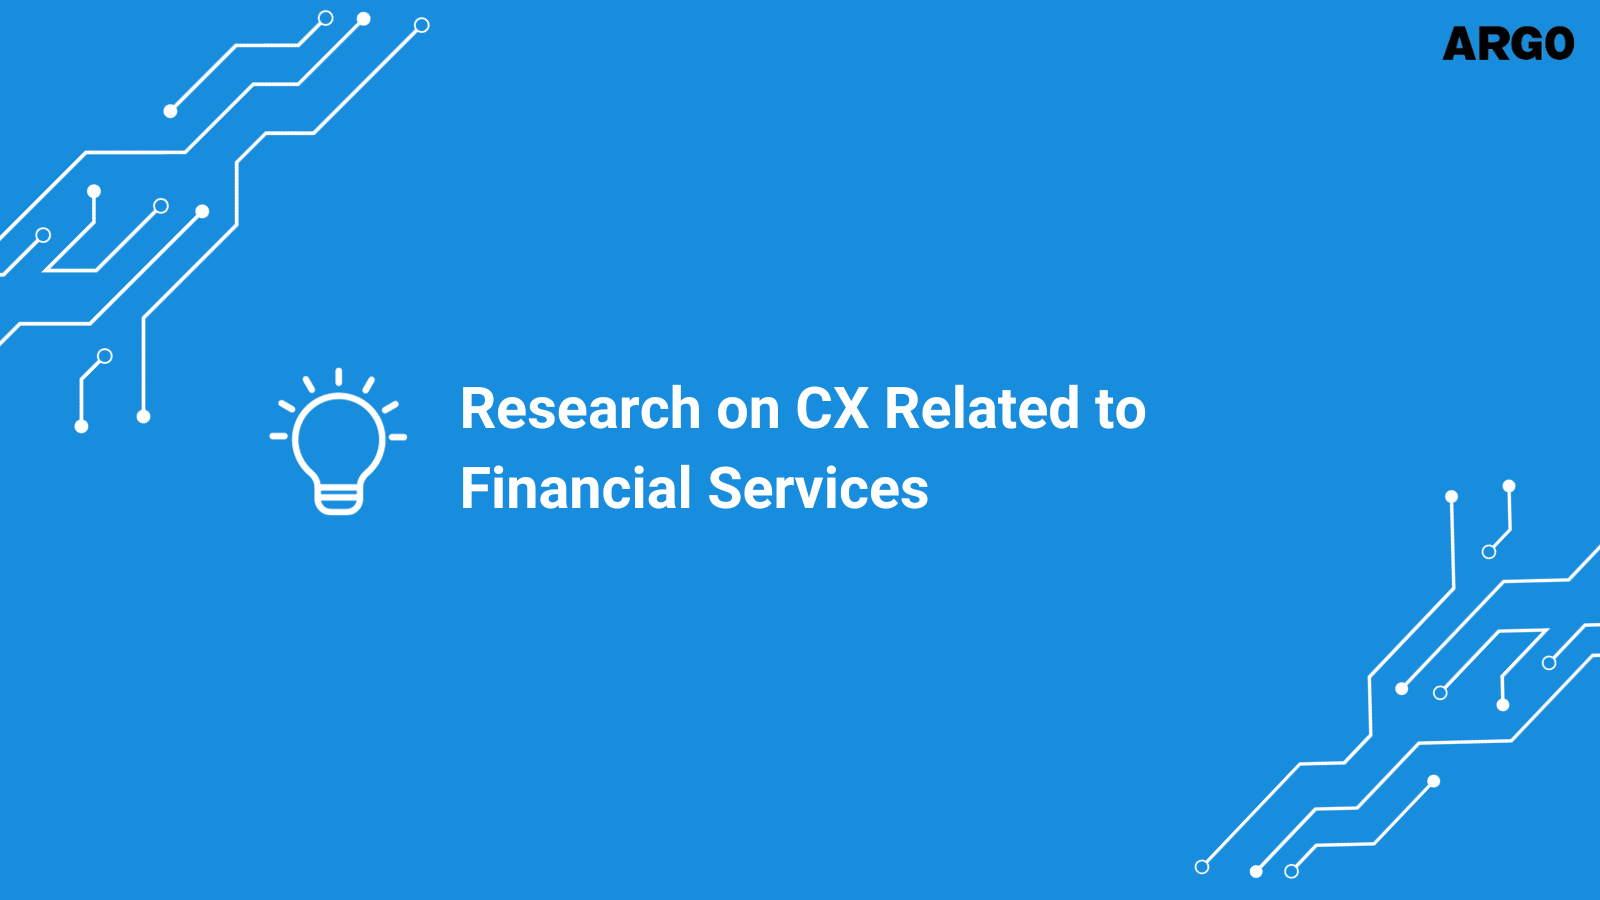 Research on CX Related to Financial Services